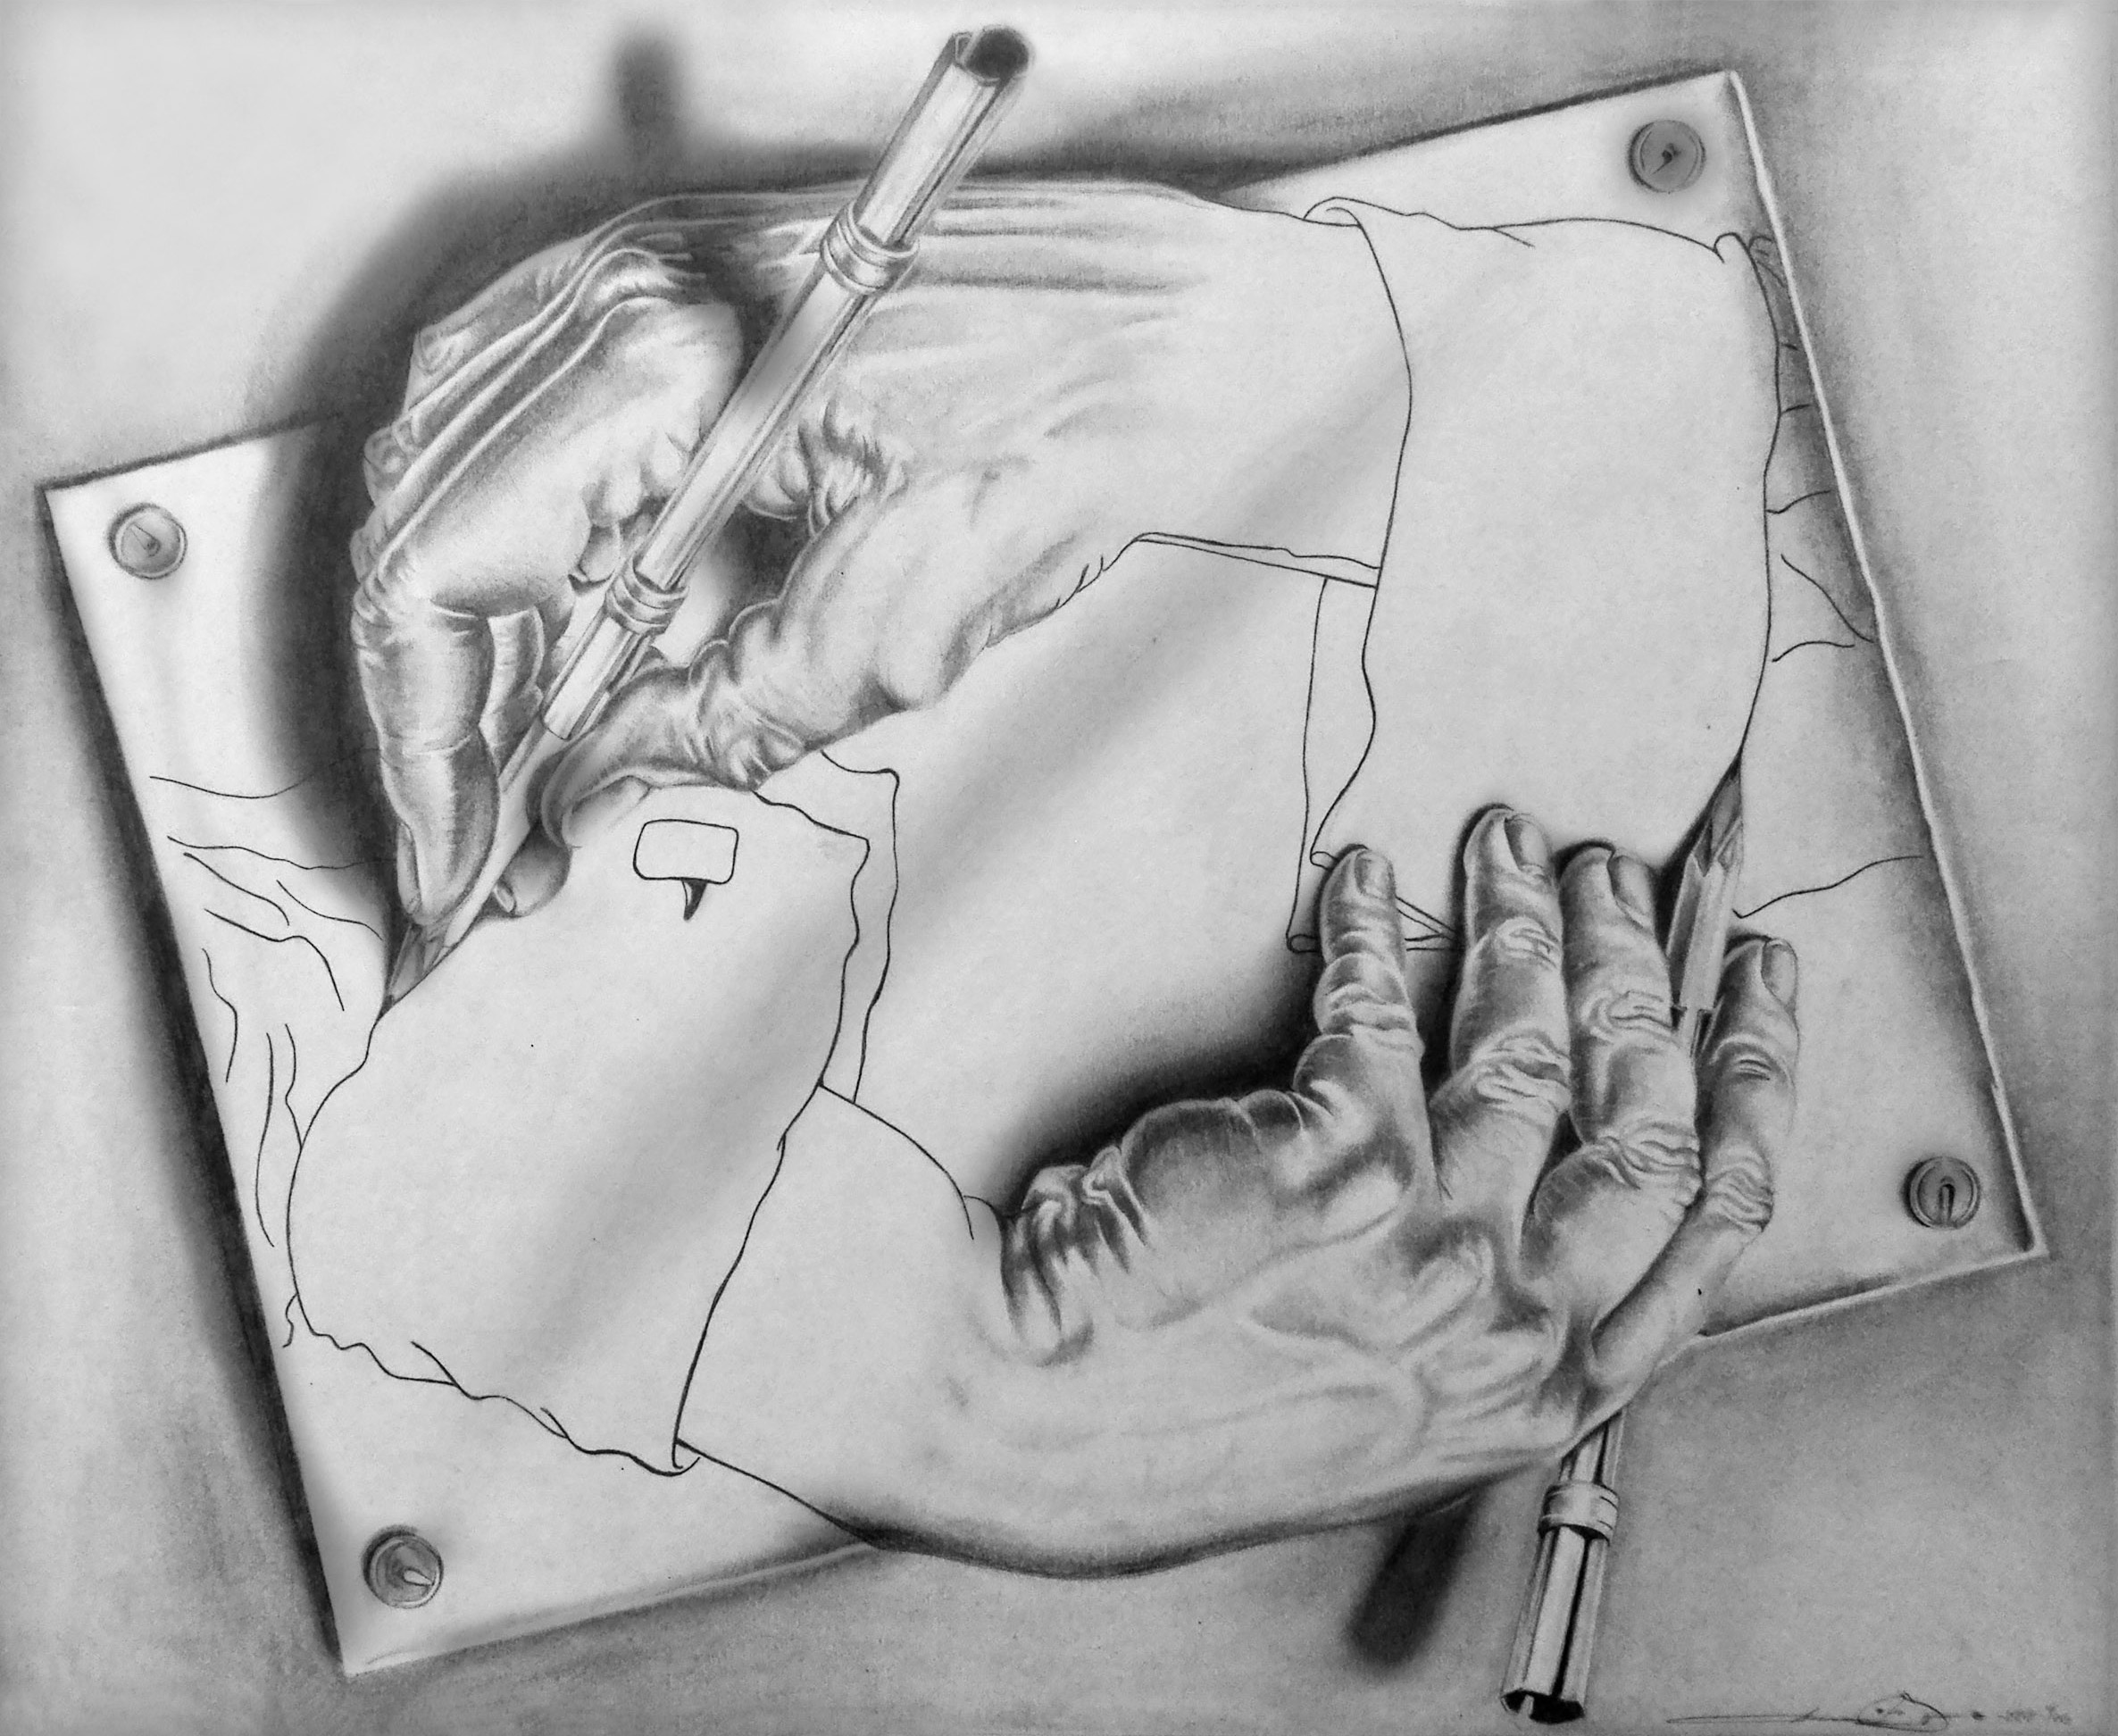  "Drawing Hands", lithograph, by M. C. Escher, first printed in January 1948 